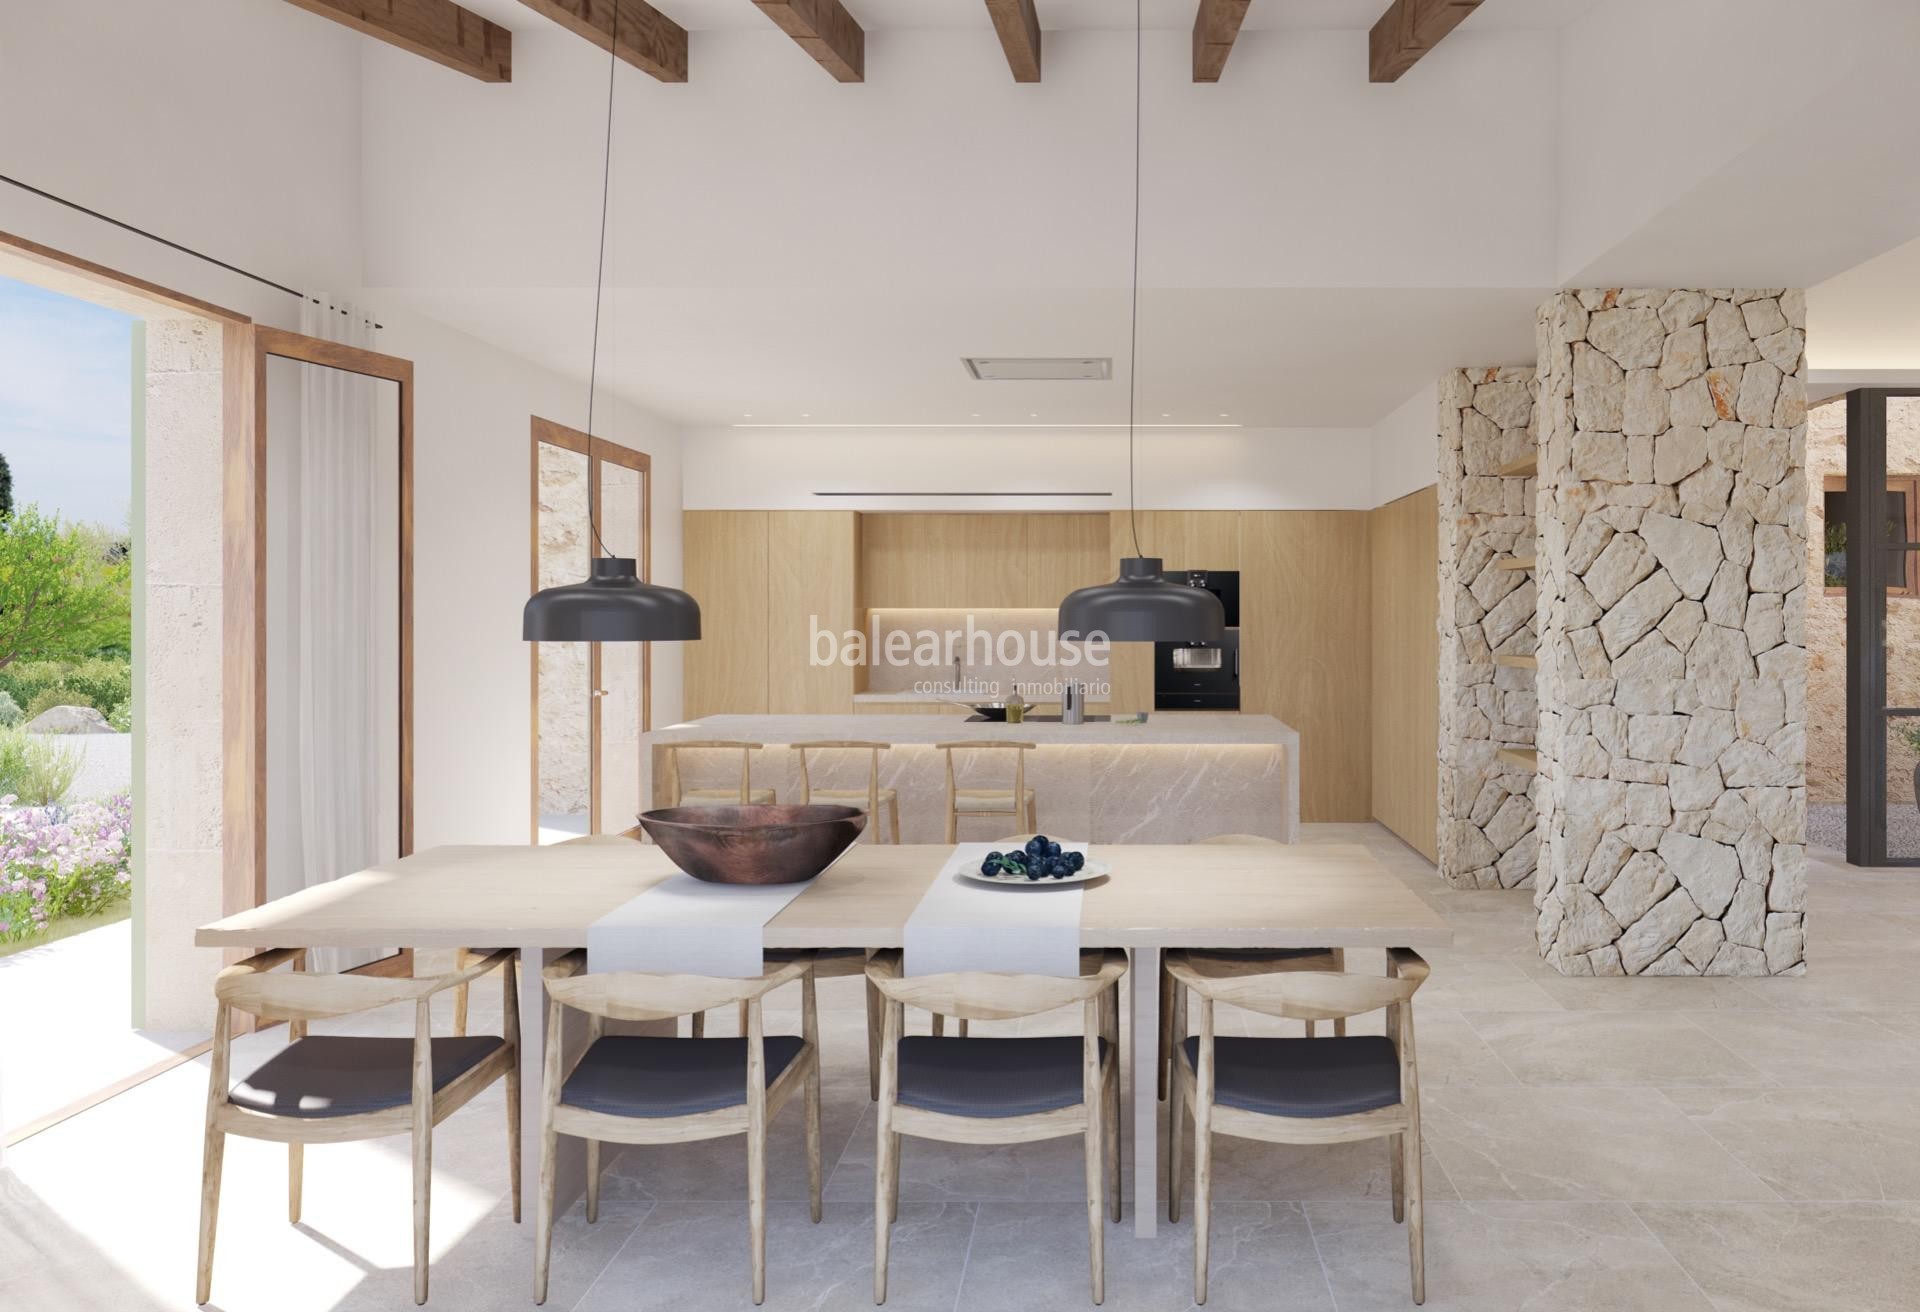 Magnificent newly built finca in a paradise among vineyards in the interior of Mallorca